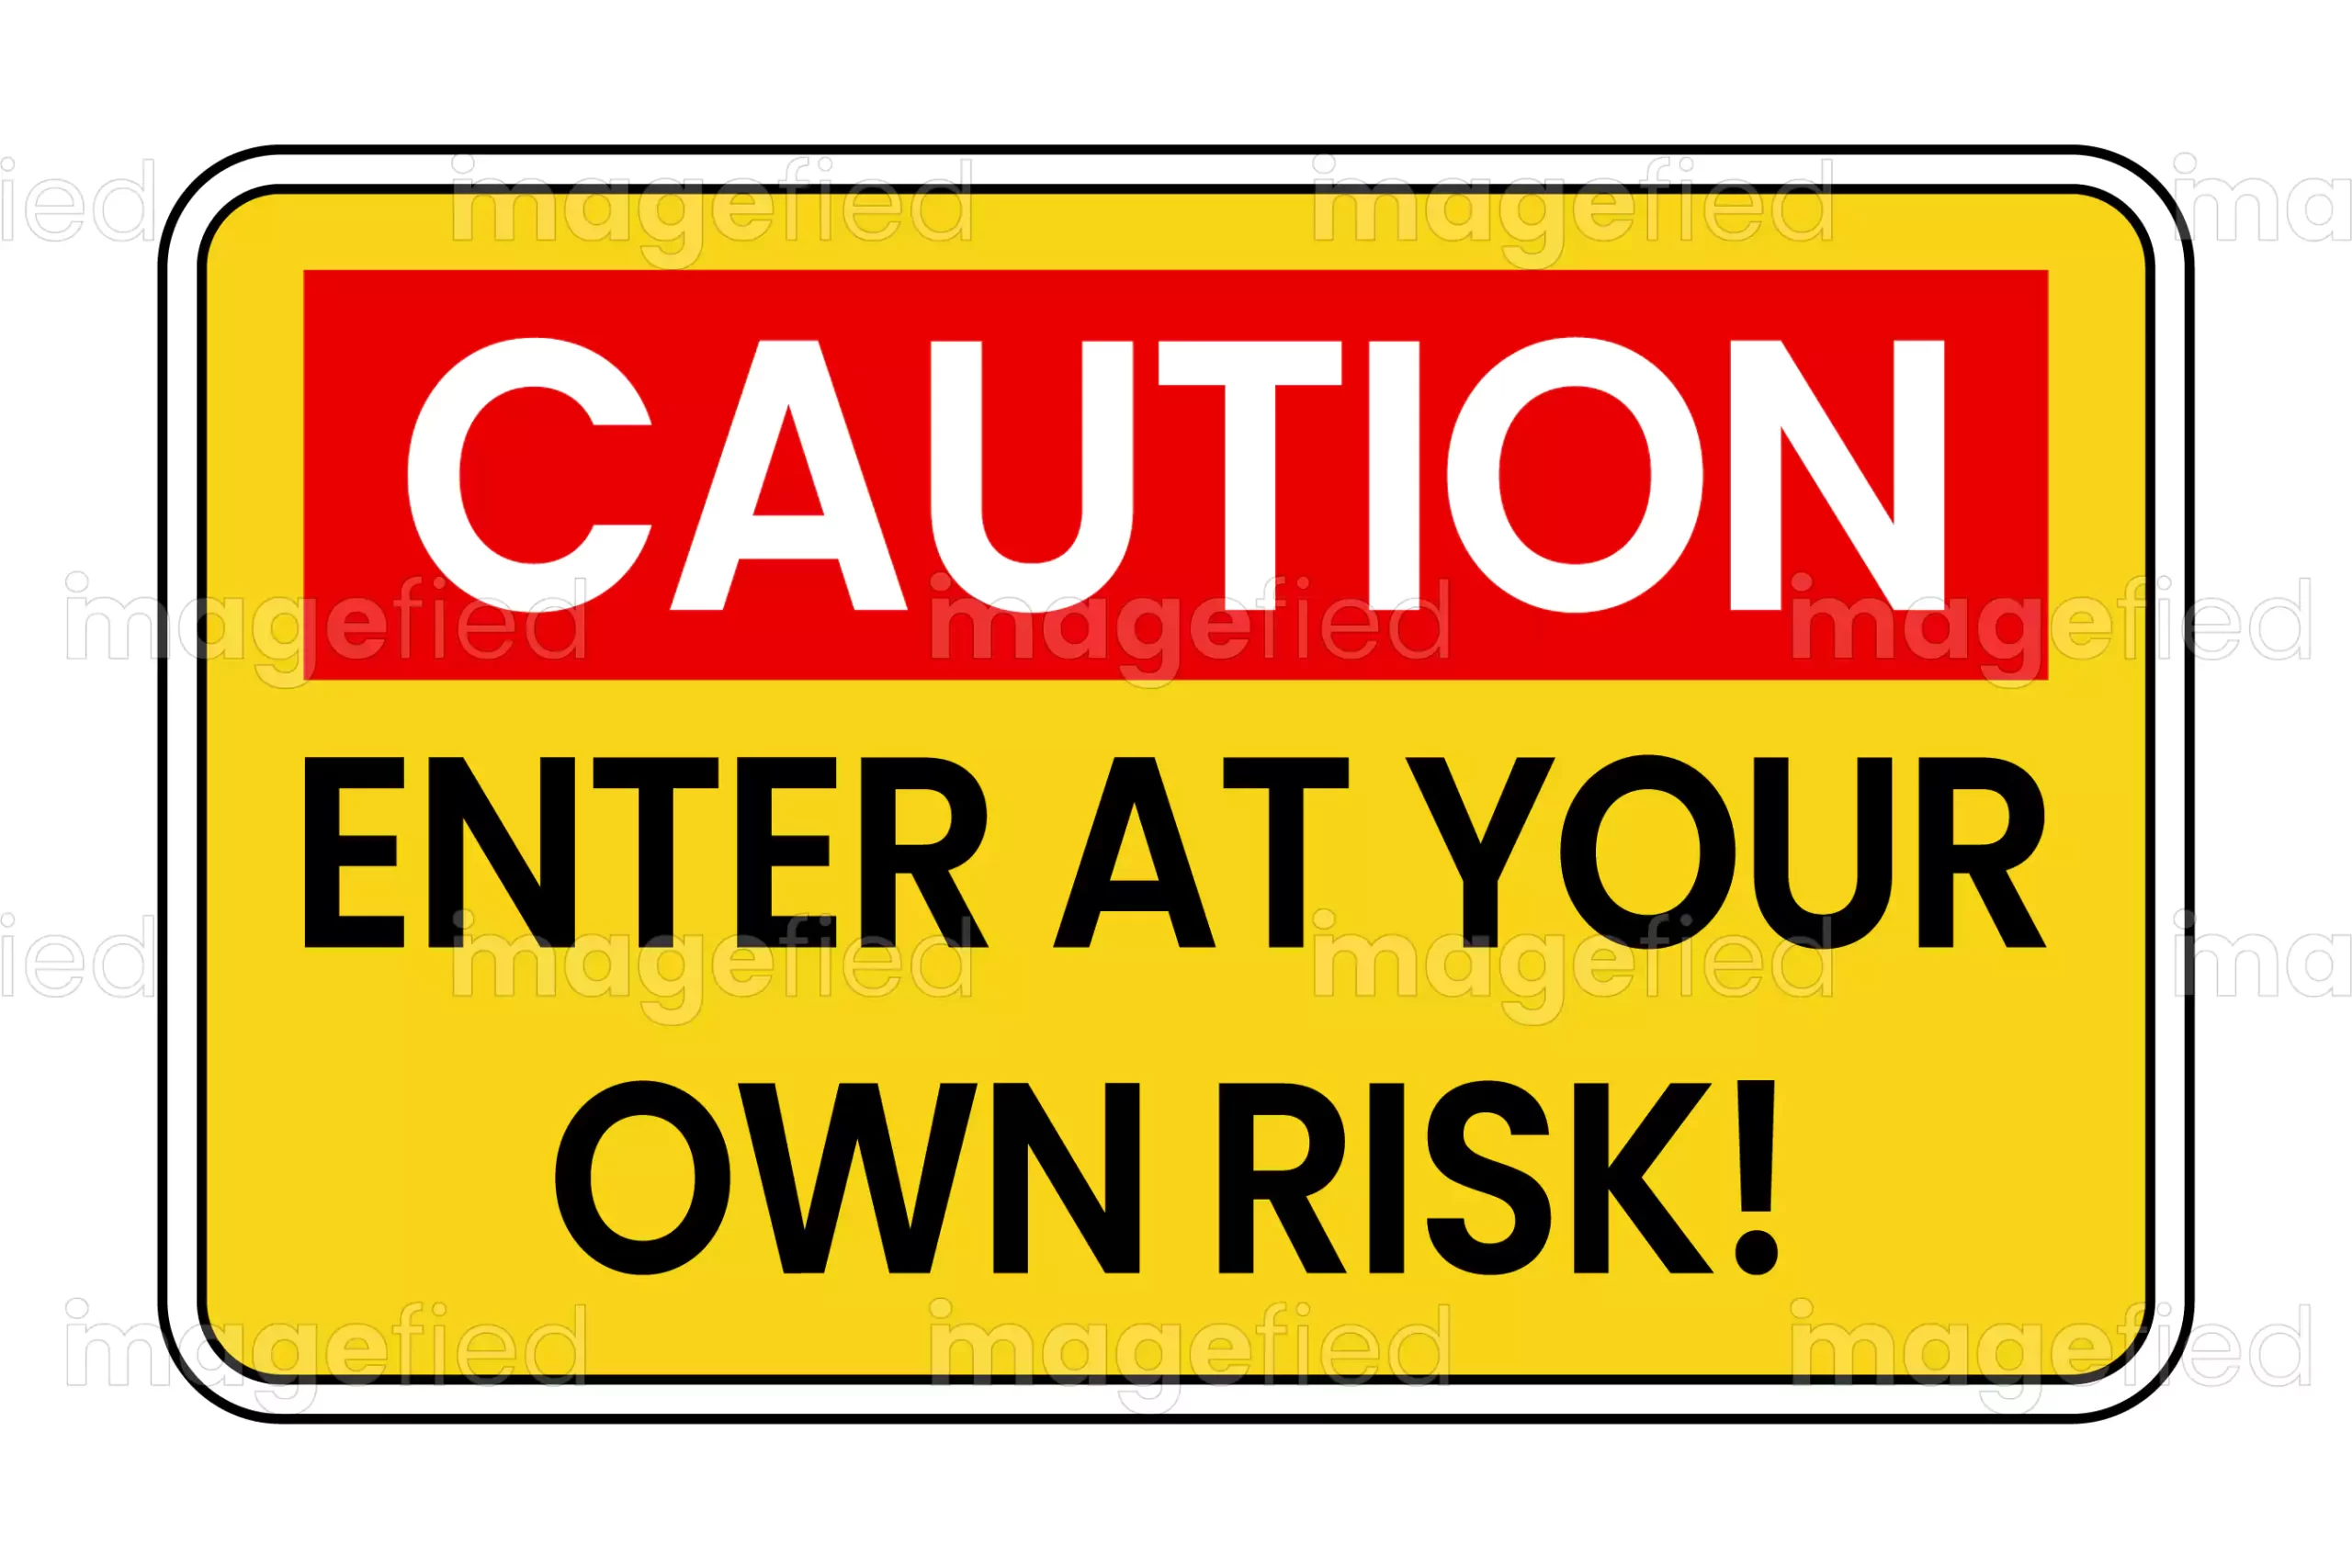 Enter at your own risk sign decal stickers, caution safety warning signage, potential danger